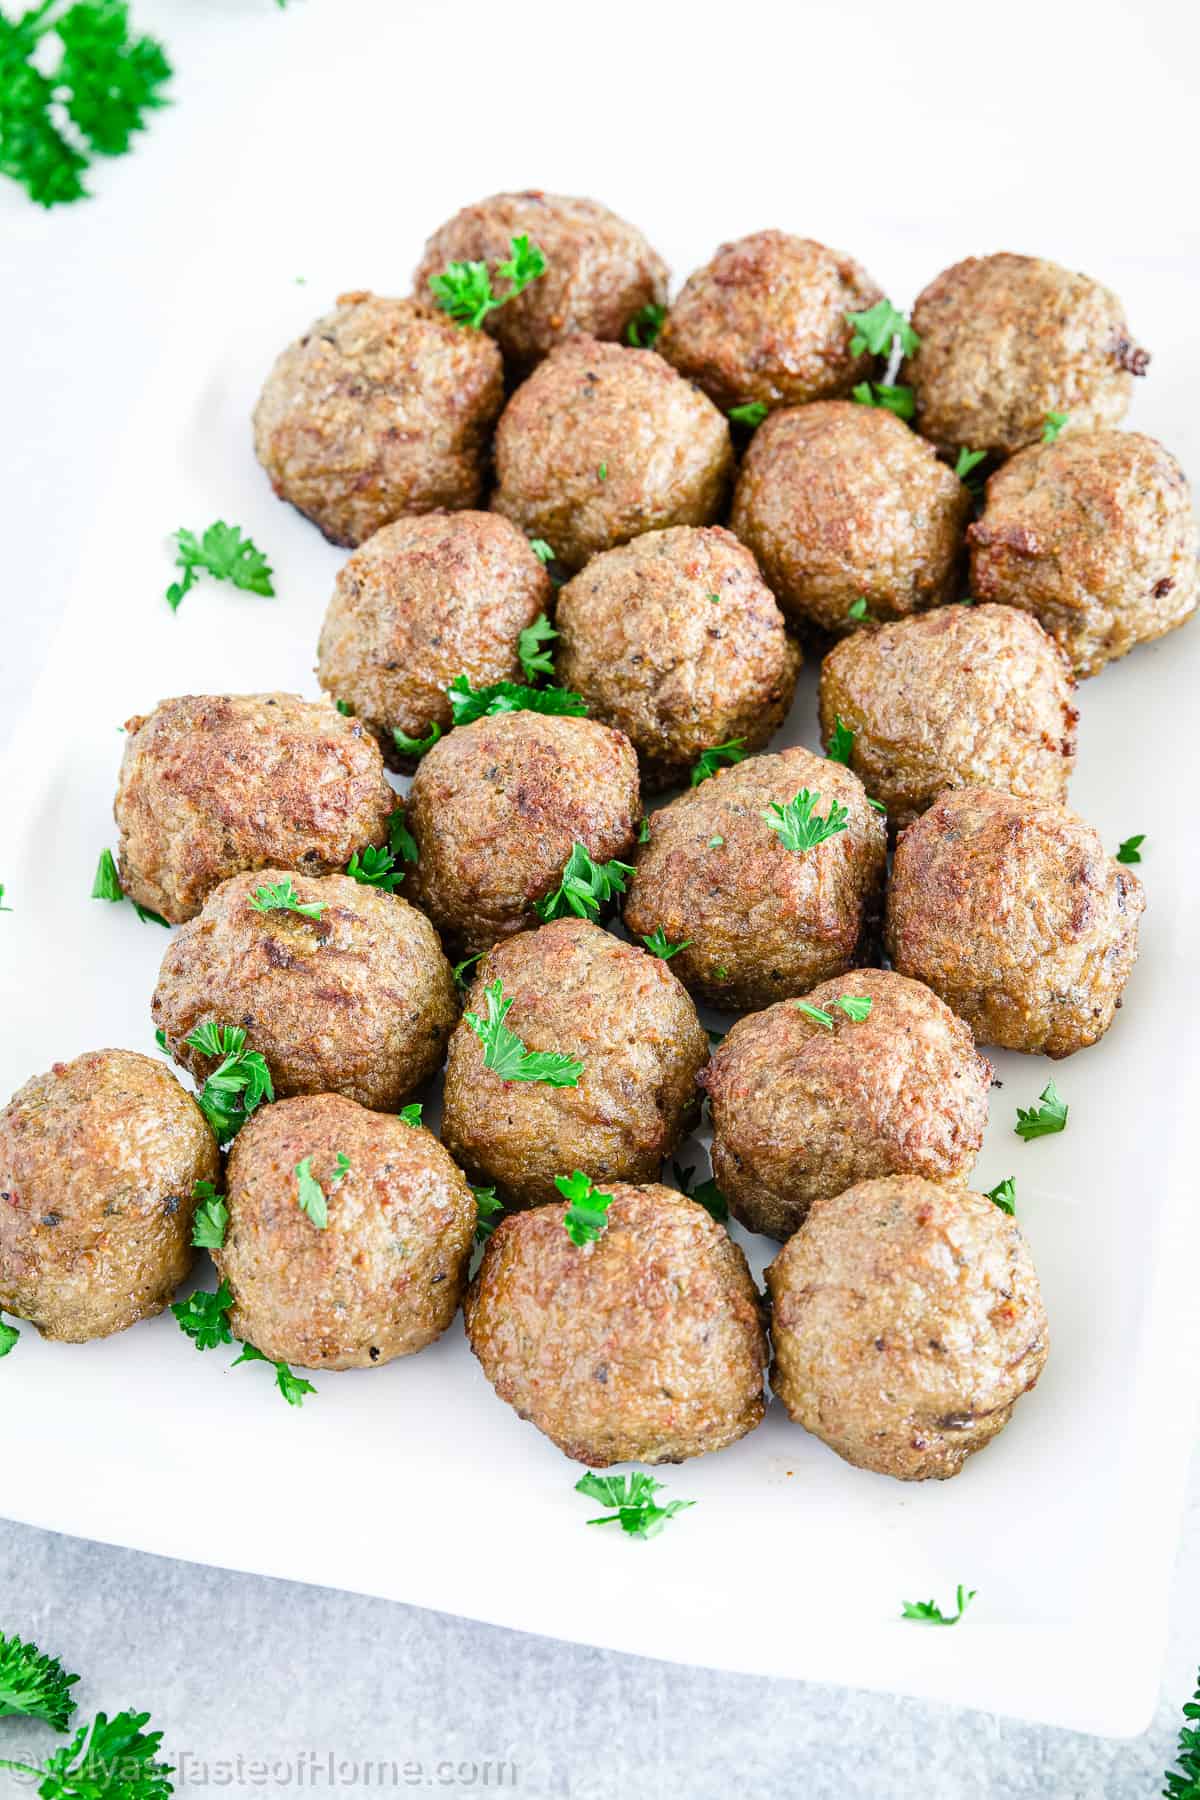 Once the meatballs are done baking and broiling, remove them from the oven and transfer them to a serving dish. 